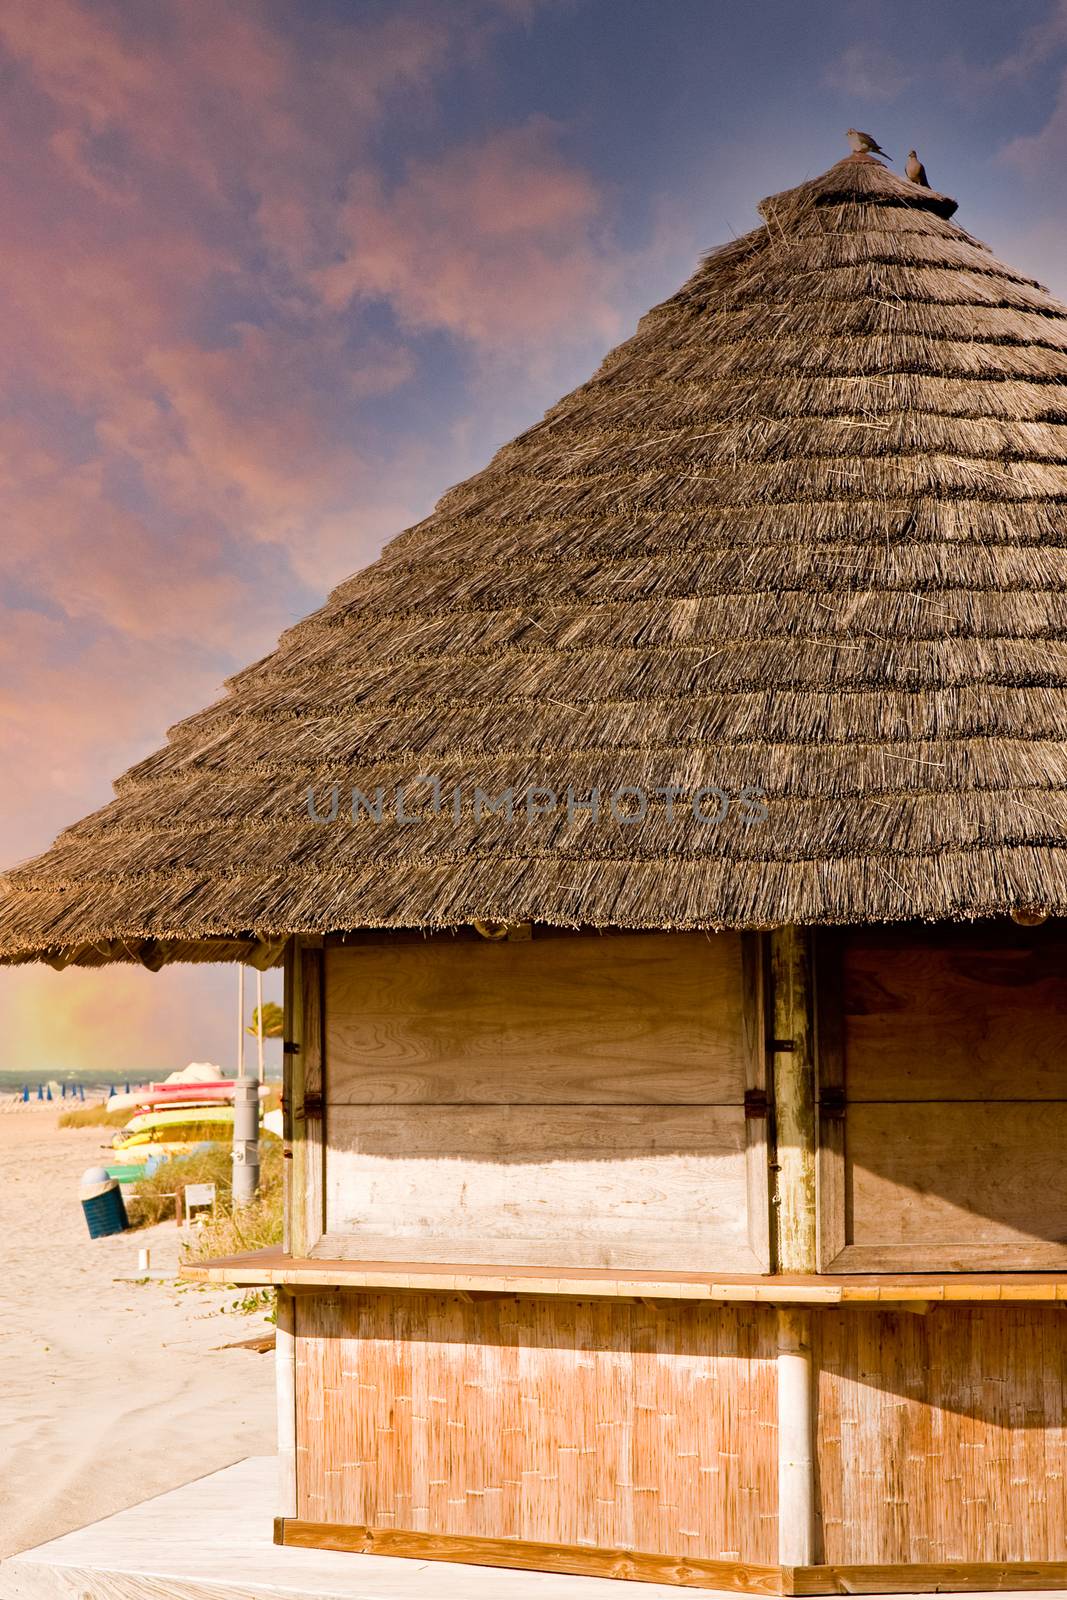 A bamboo and straw hut on an empty beach